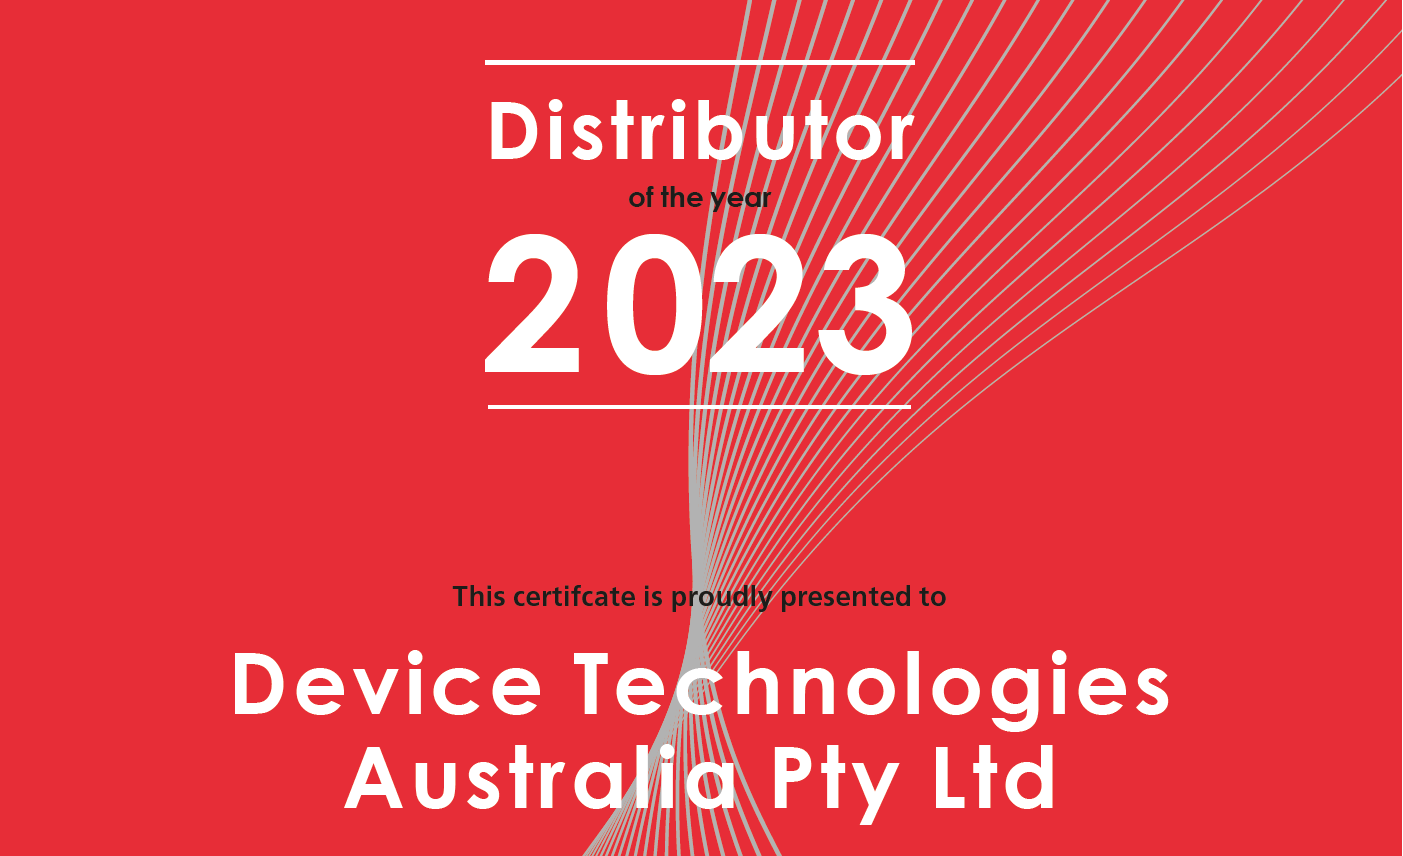 Device Technologie Distributor of the year